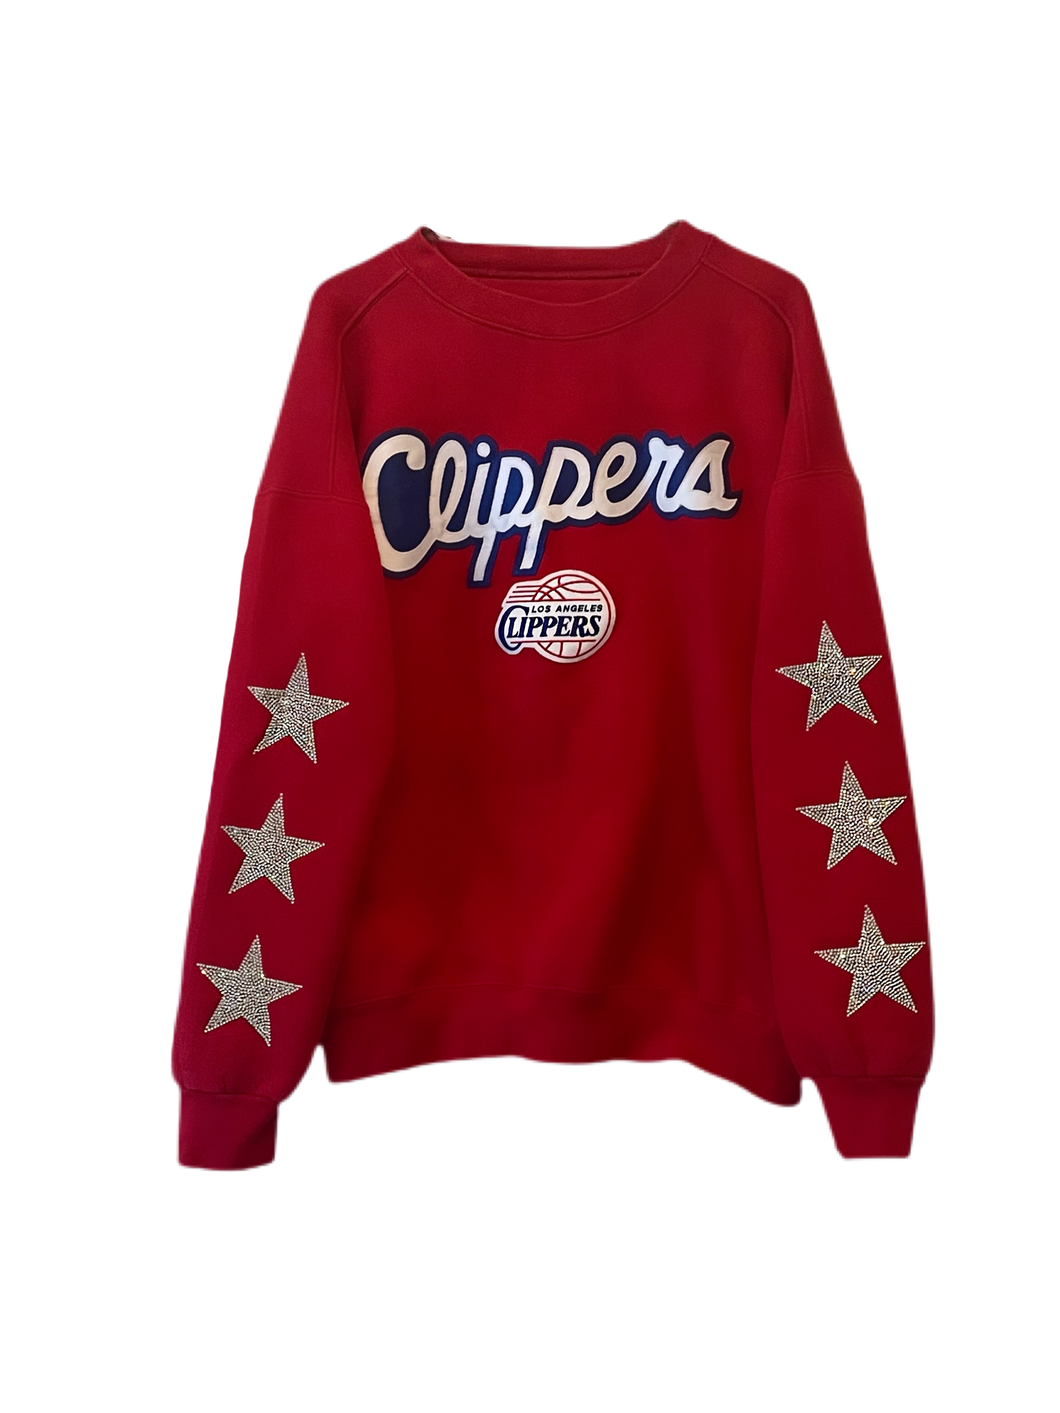 LA Clippers, NBA One of a KIND Vintage Sweatshirt with Crystal Star Design